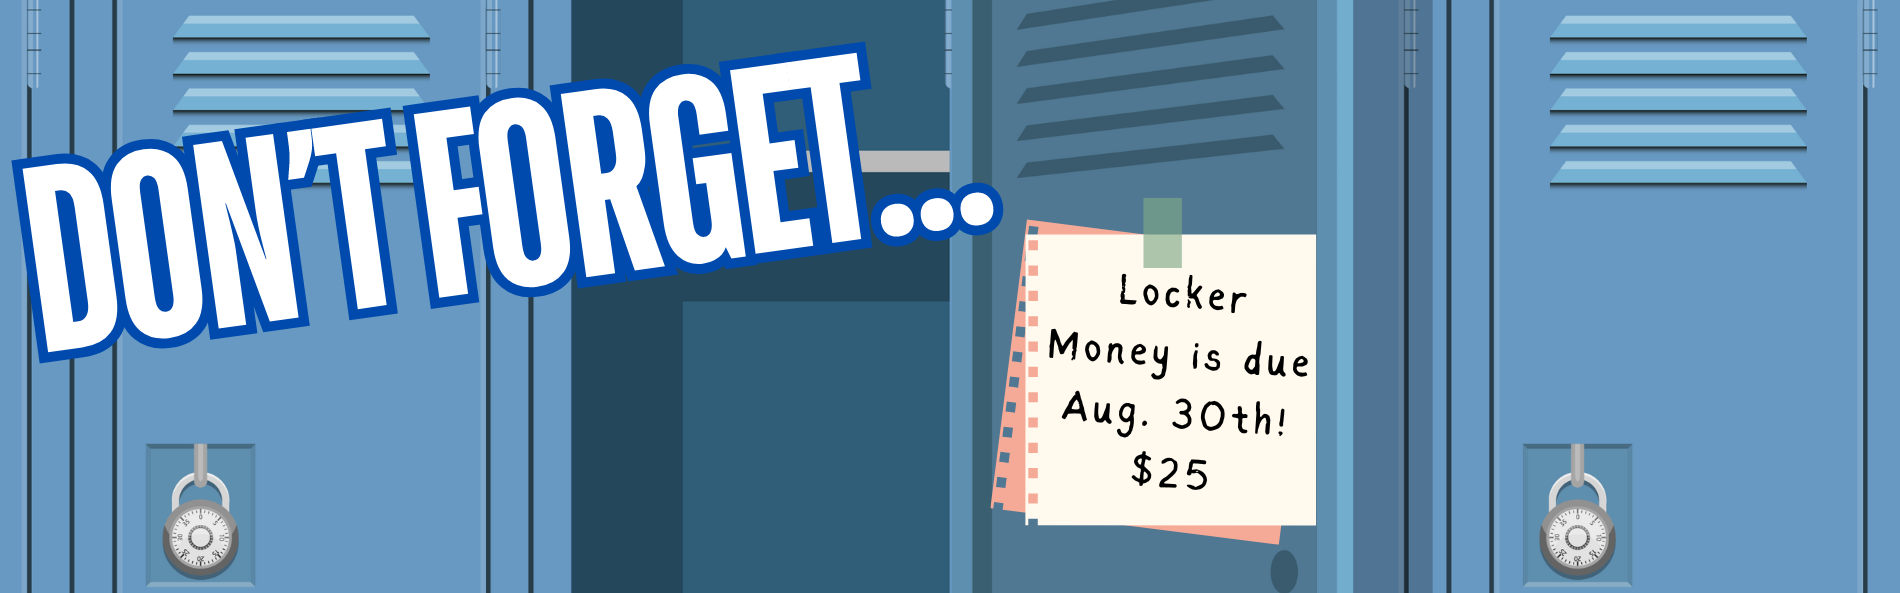 Locker payments ($25) are due 8/30!